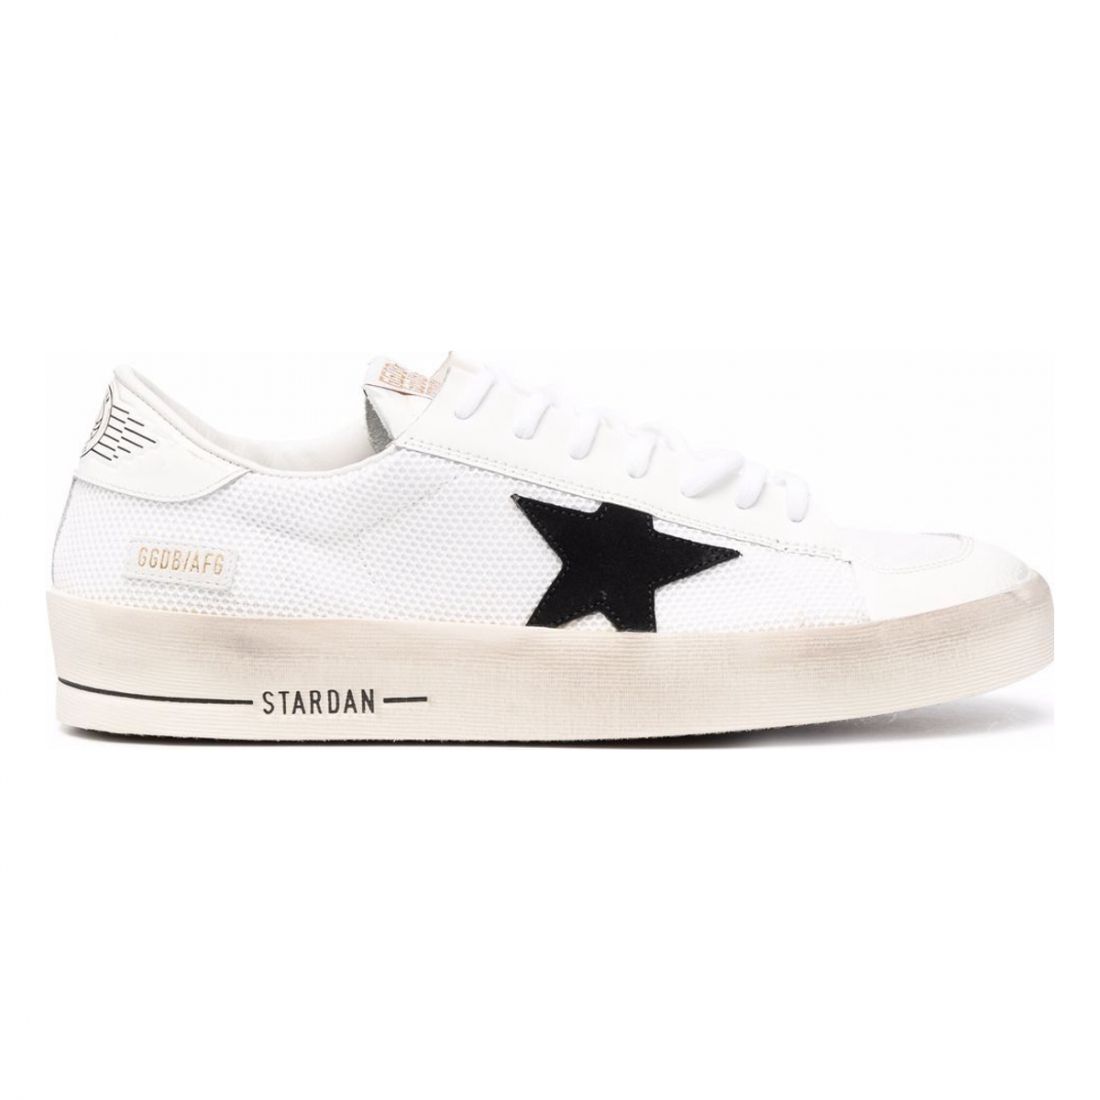 Golden Goose Deluxe Brand - Sneakers 'Star Patch' pour Hommes